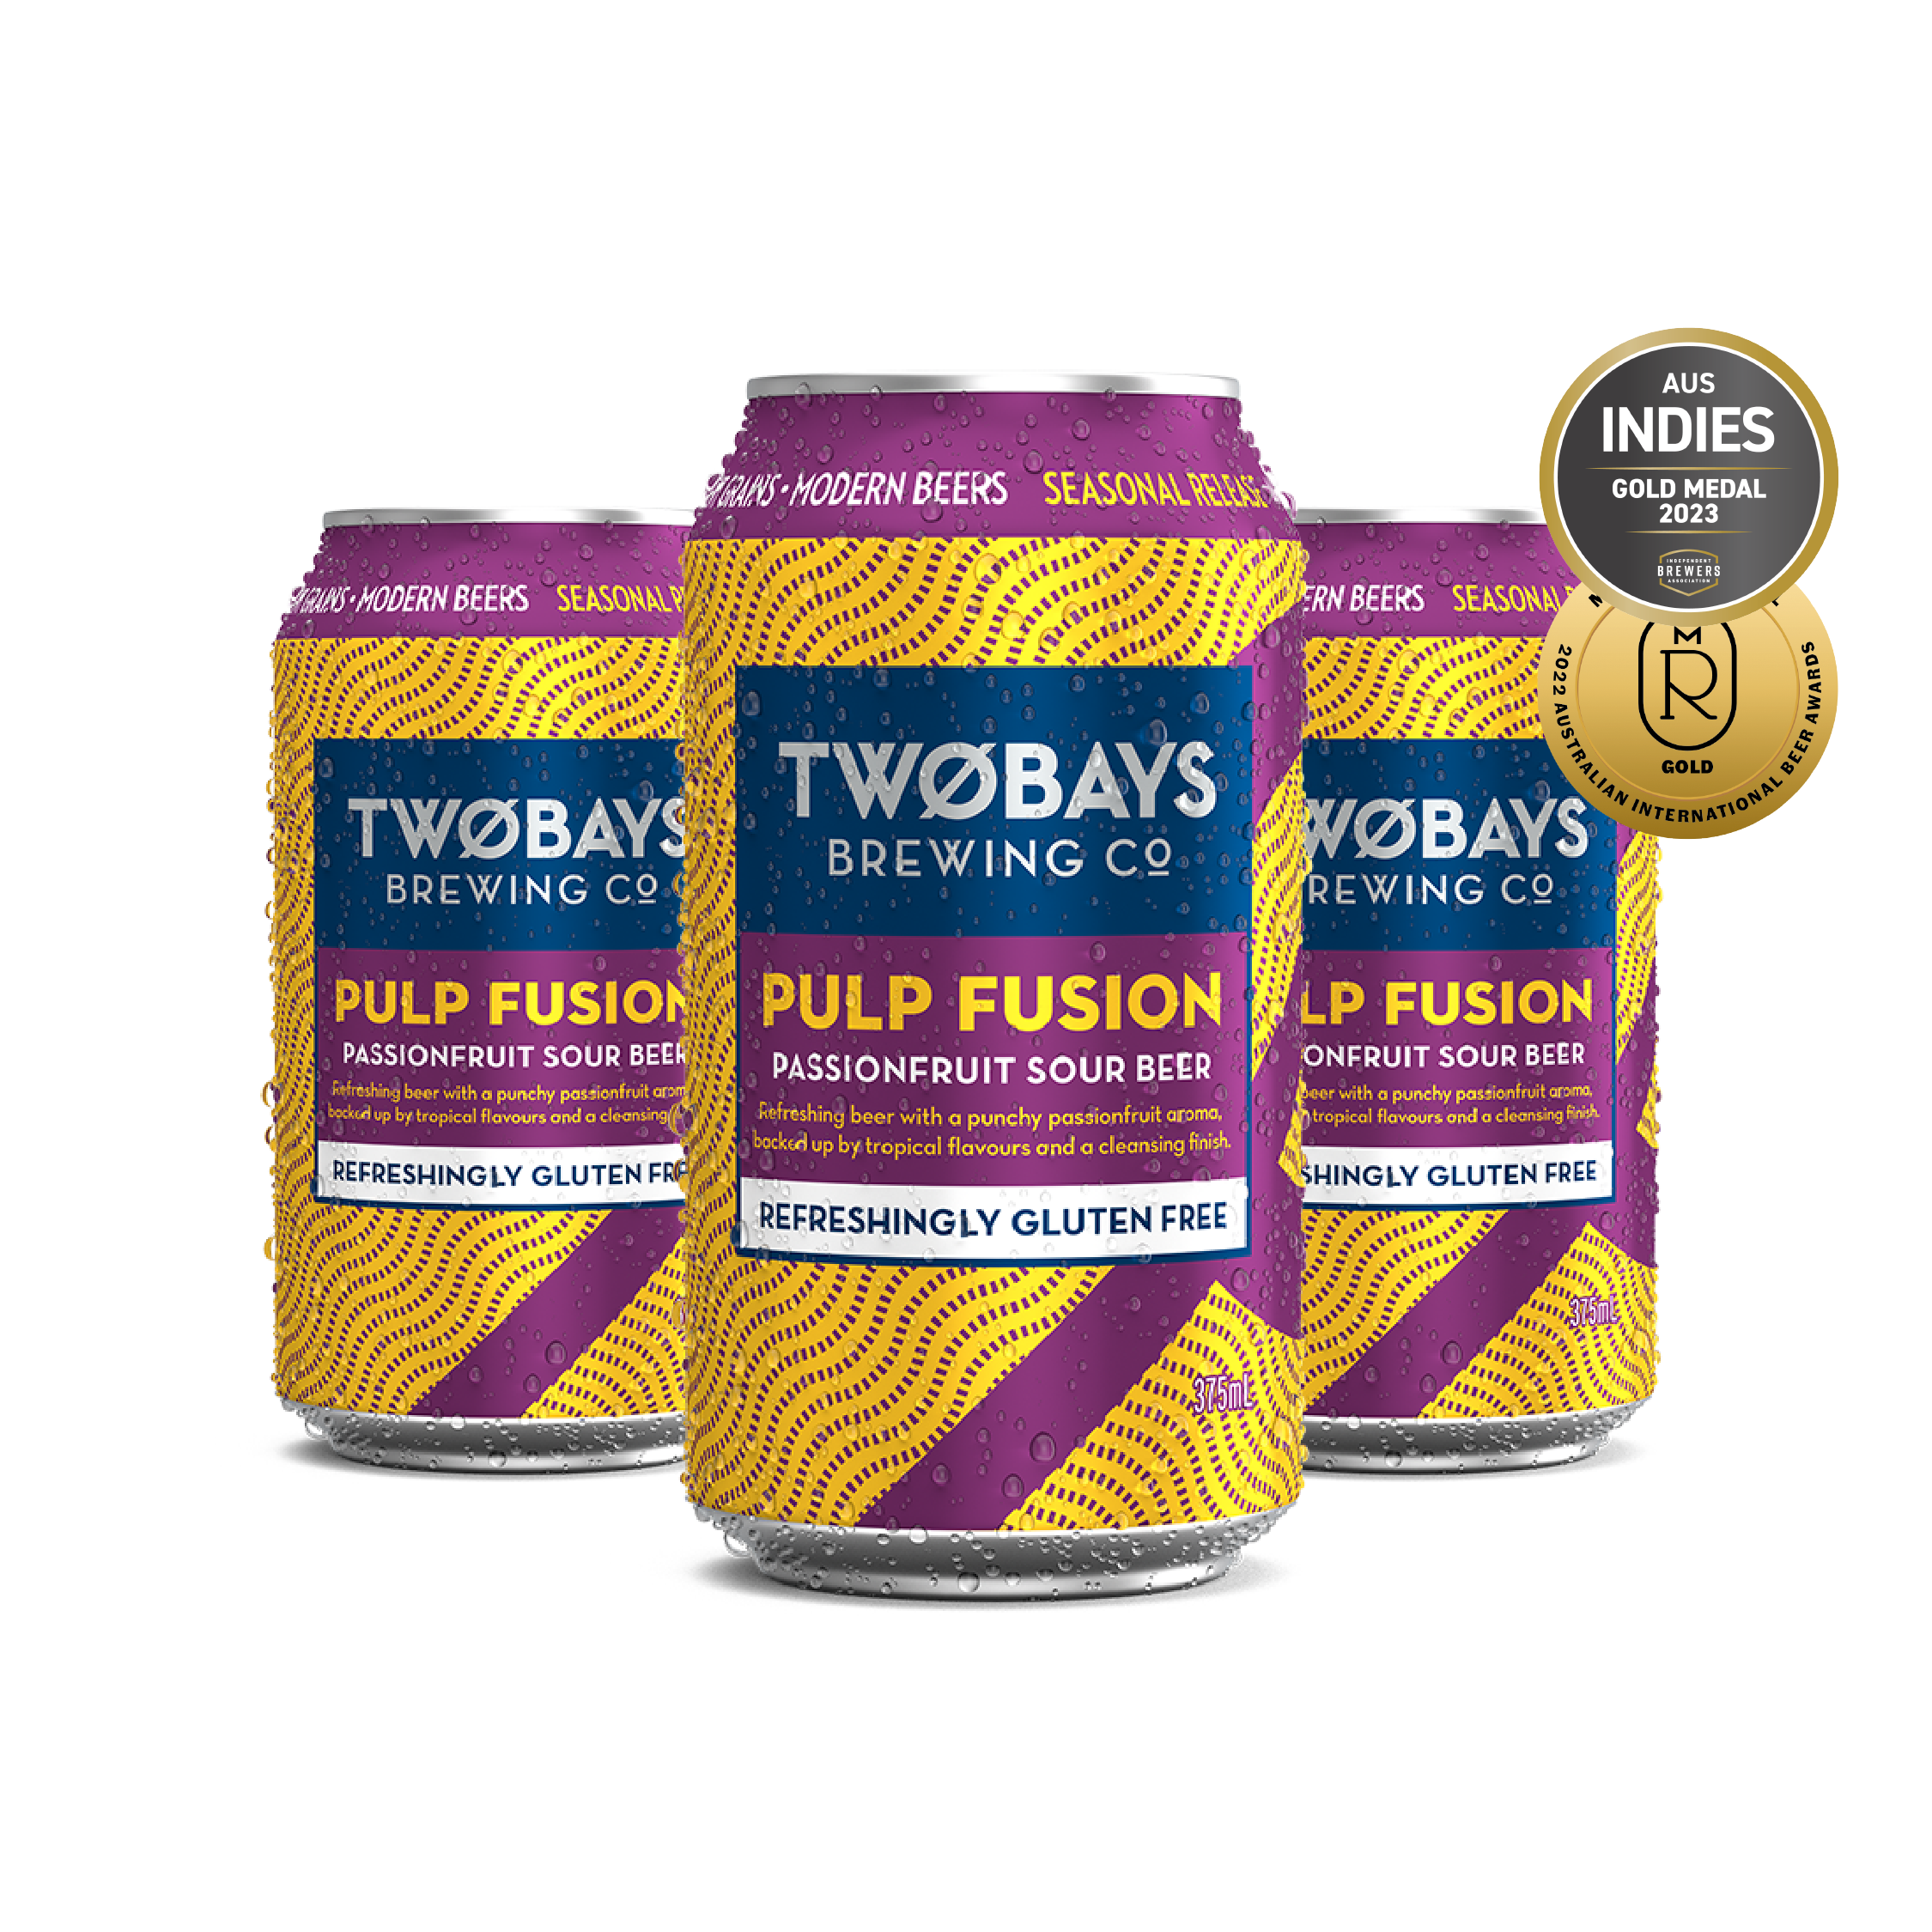 Pulp Fusion Passionfruit Sour Beer